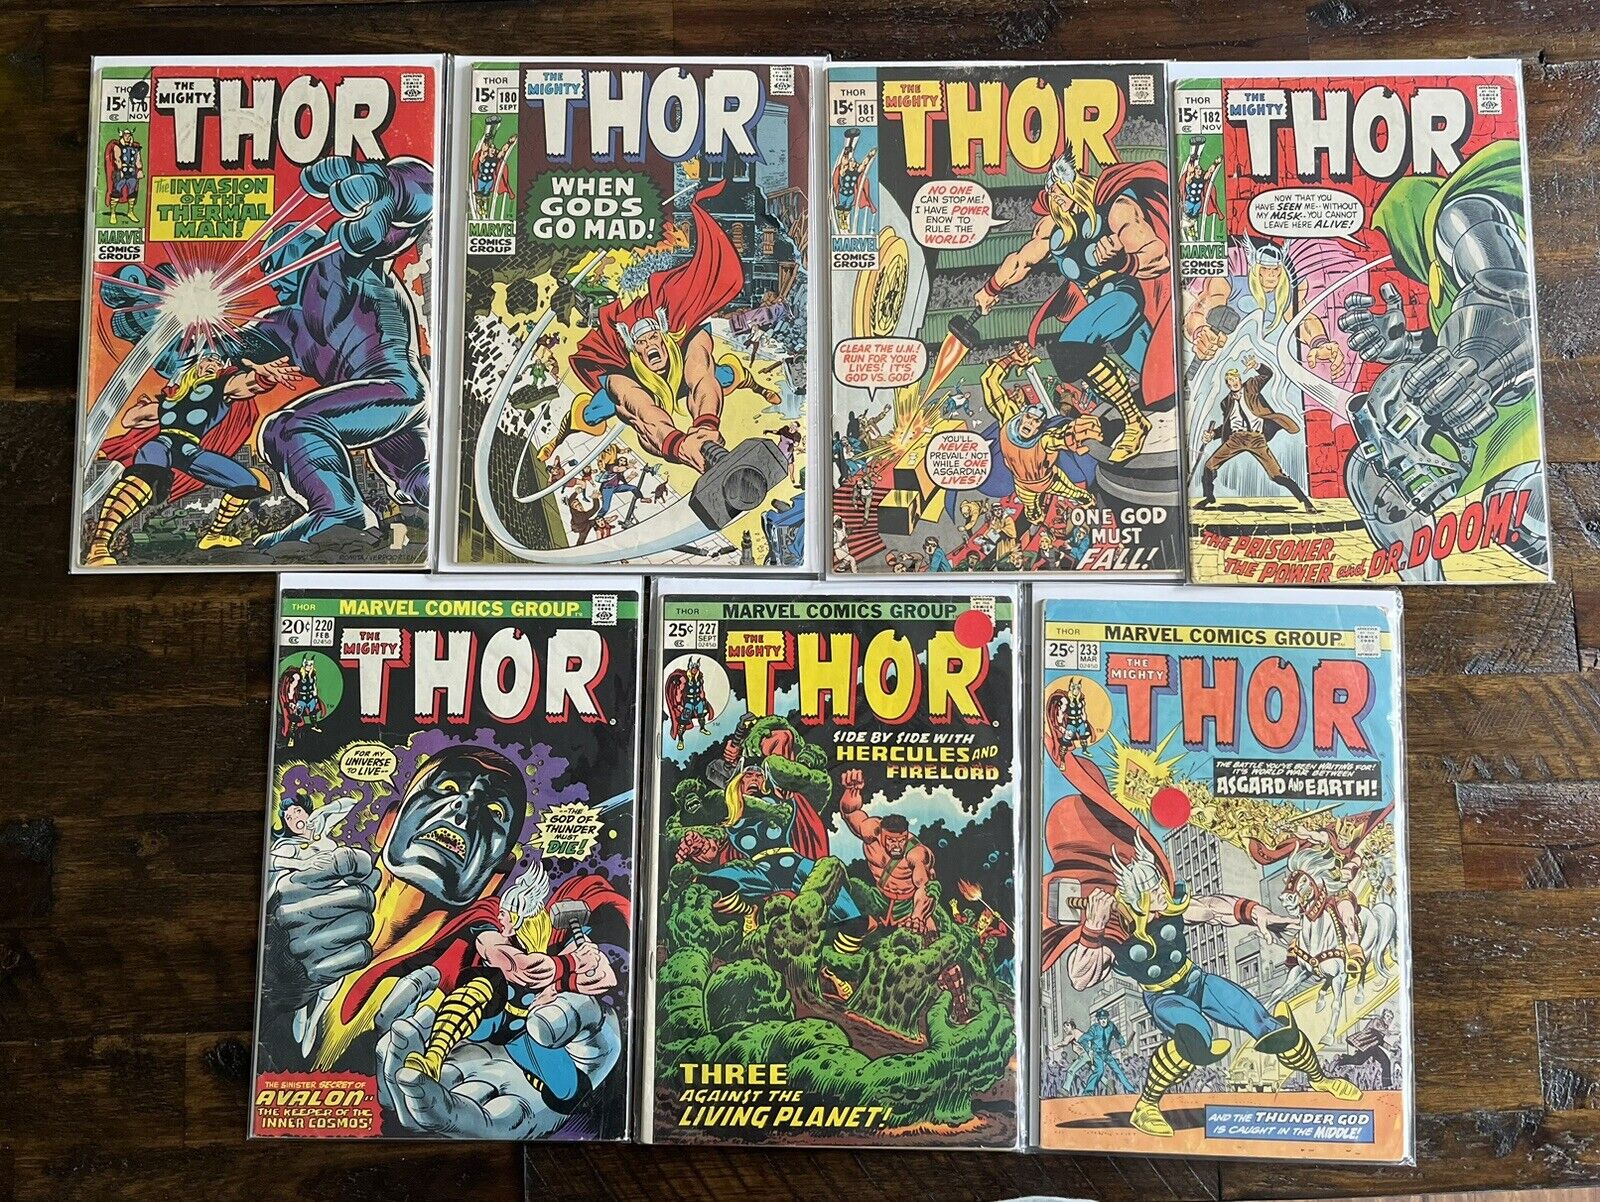 Lot of 7 bronze age Thor comics  VG condition. 170,180,181,182, 220, 227 233